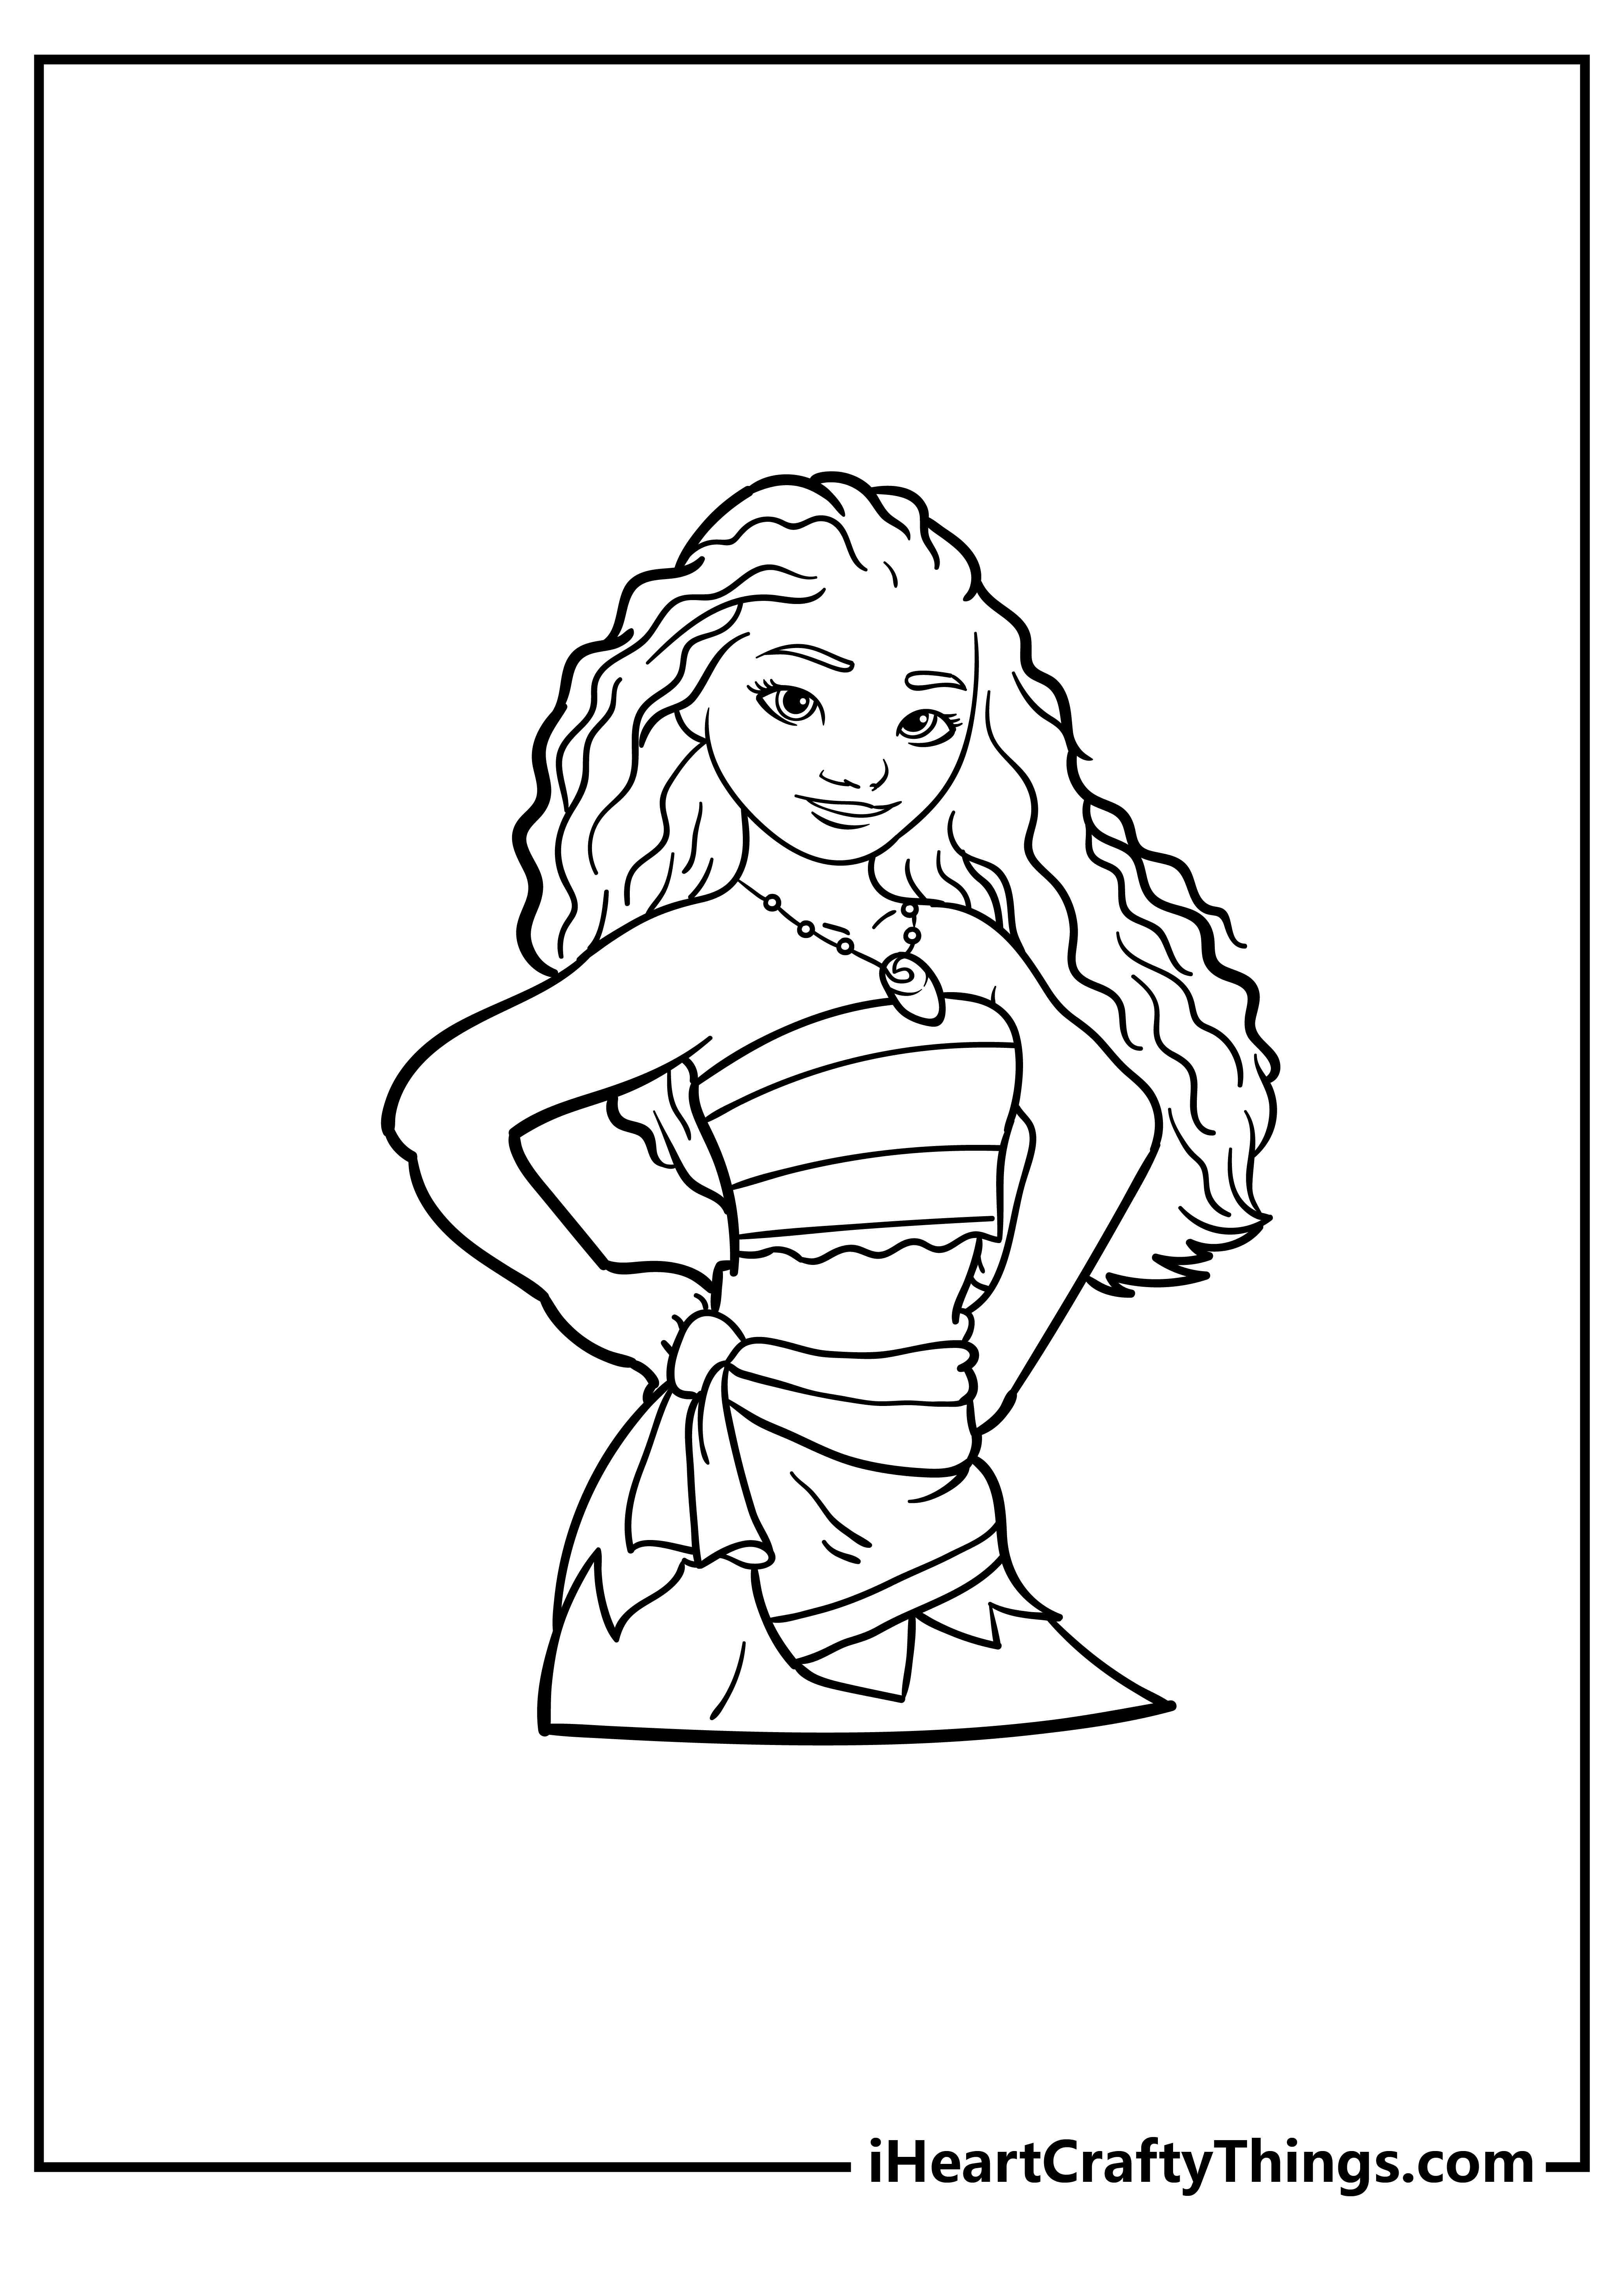 Moana Coloring Pages for preschoolers free printable